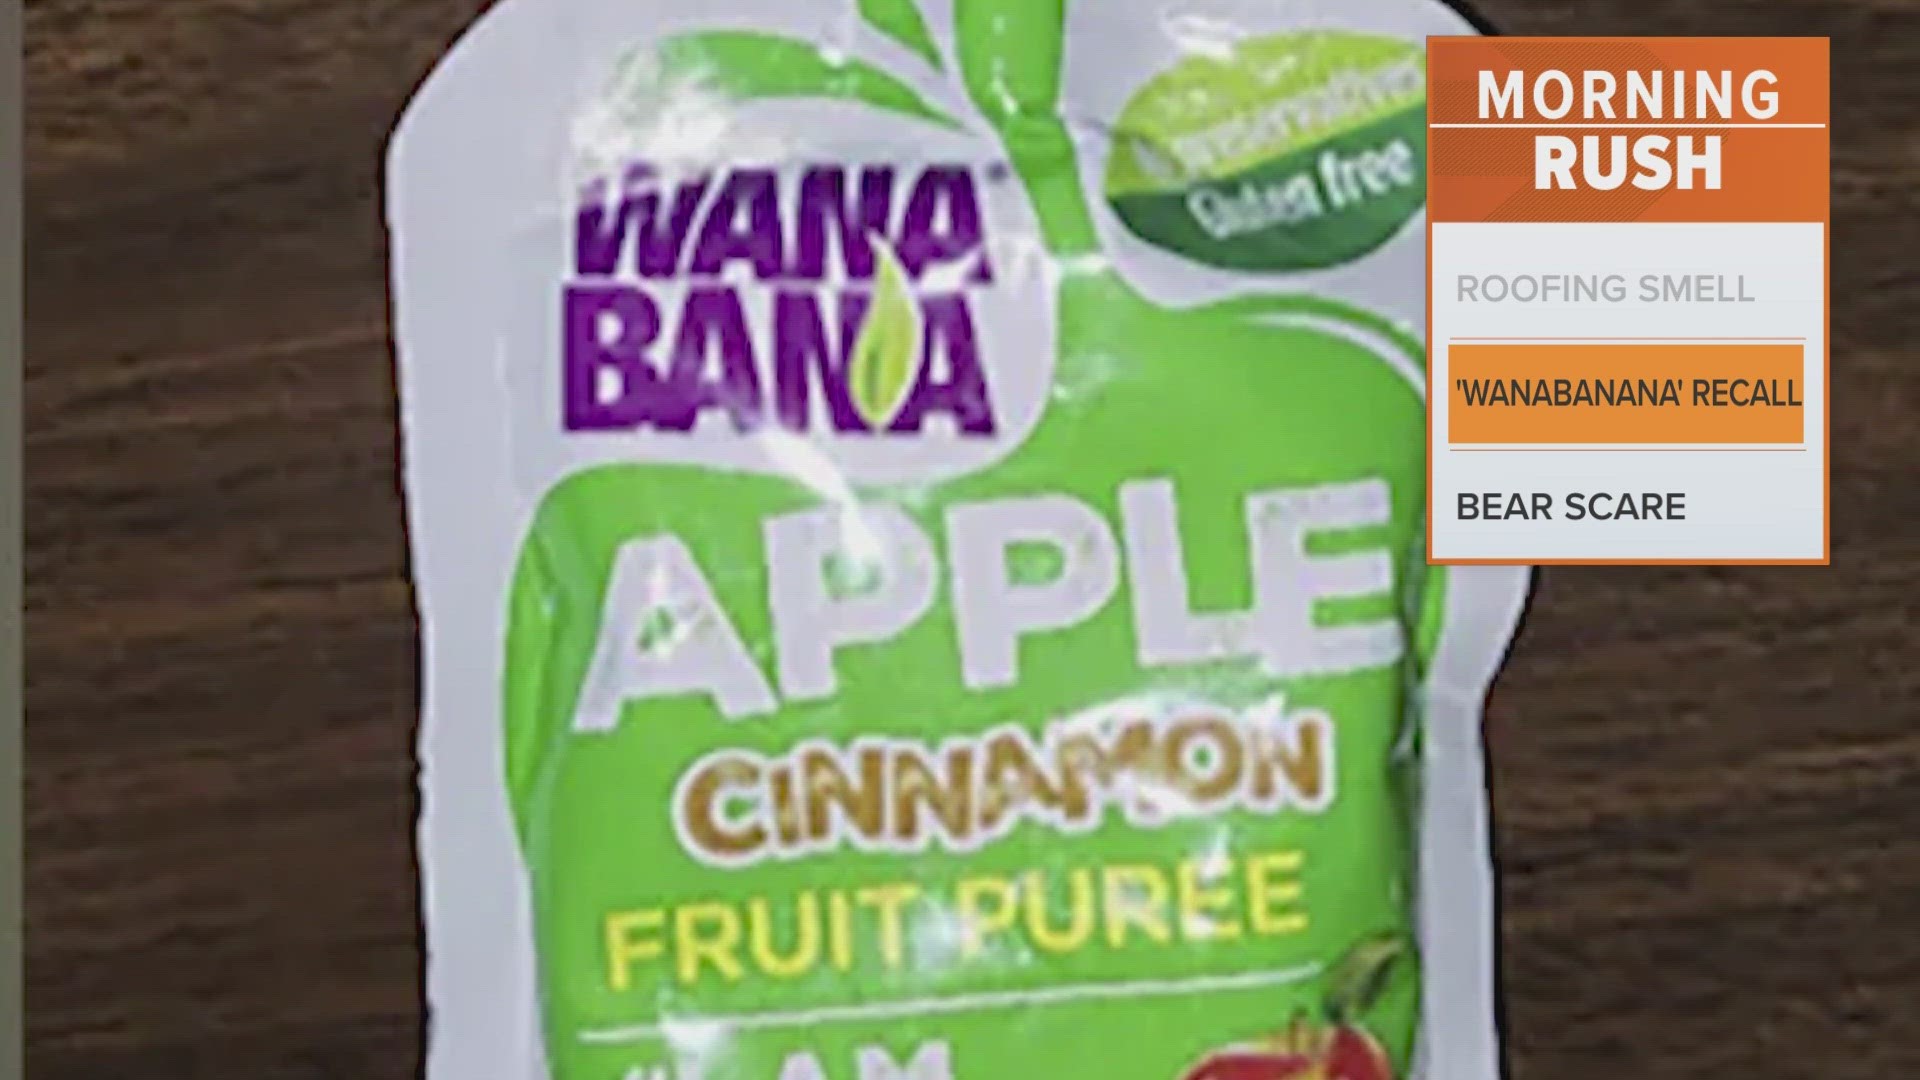 According to the FDA, the recall is issued for WanaBana's apple cinnamon fruit puree pouches, all lot codes and expiration dates.